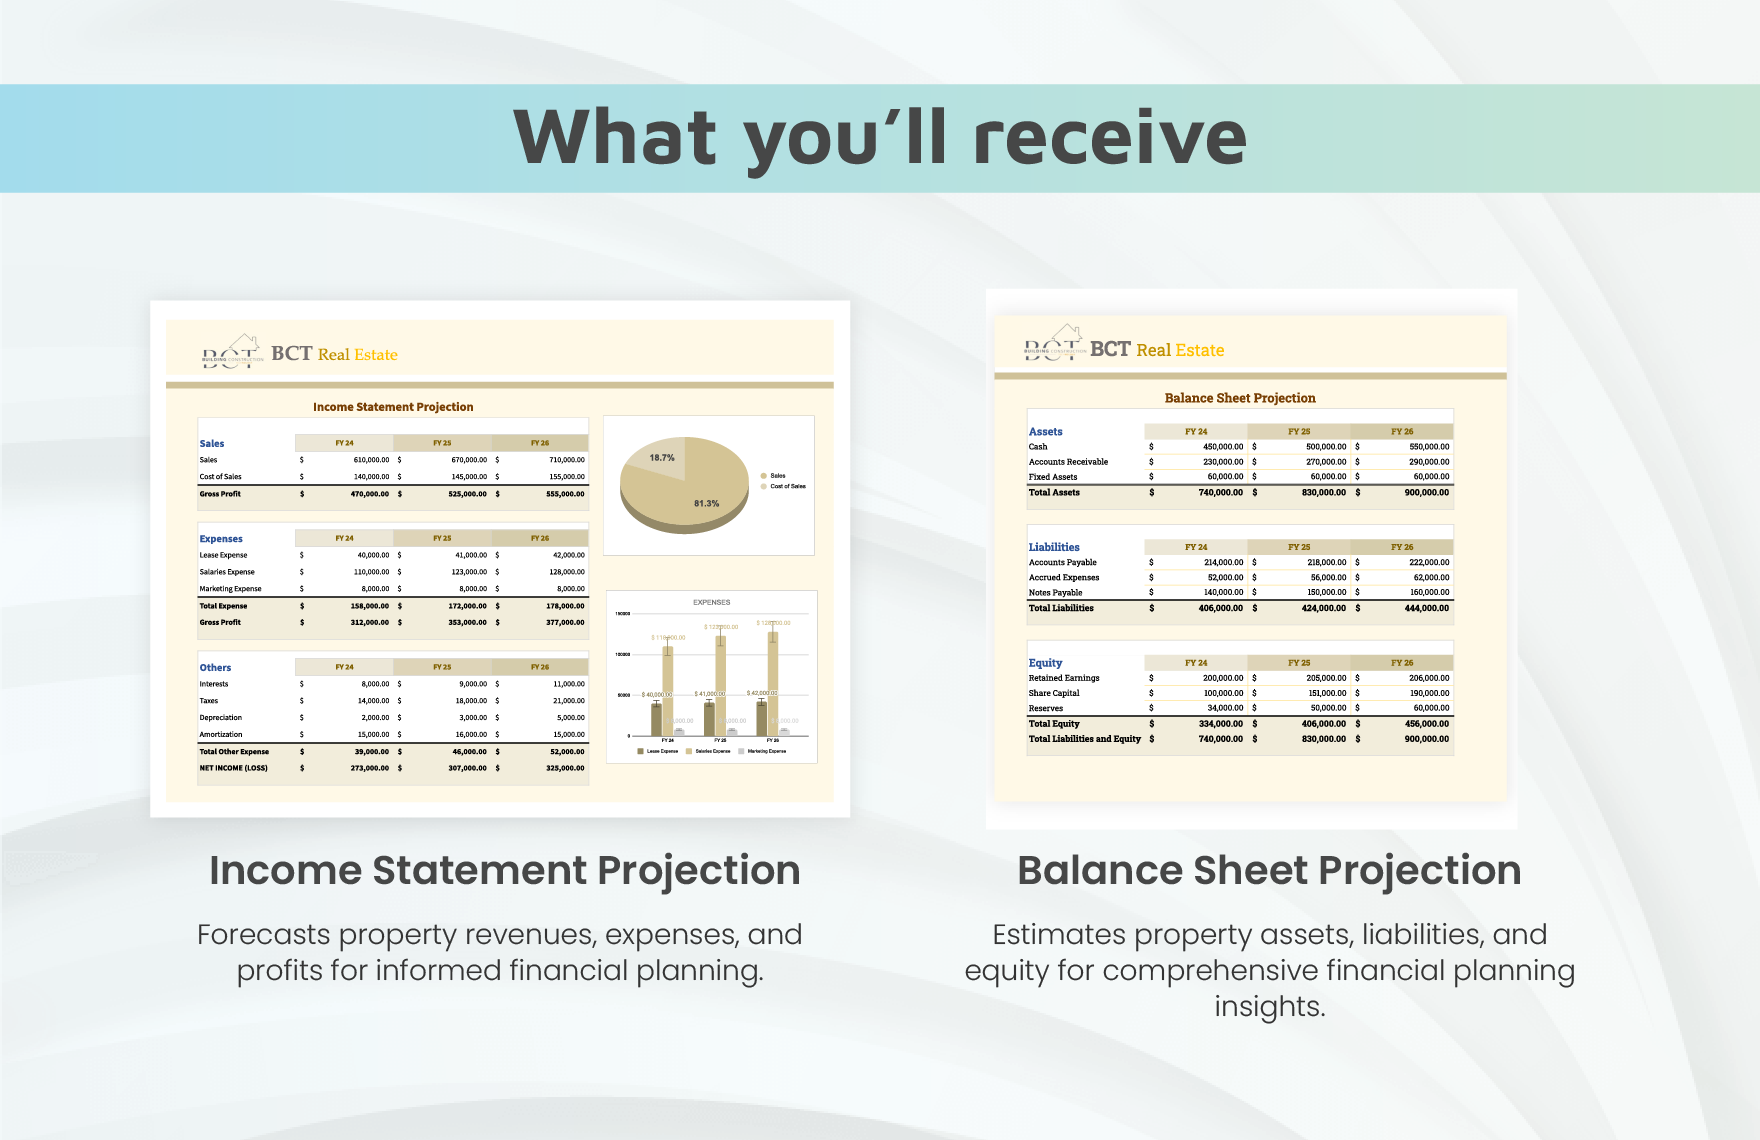 Real Estate Financial Projections Template